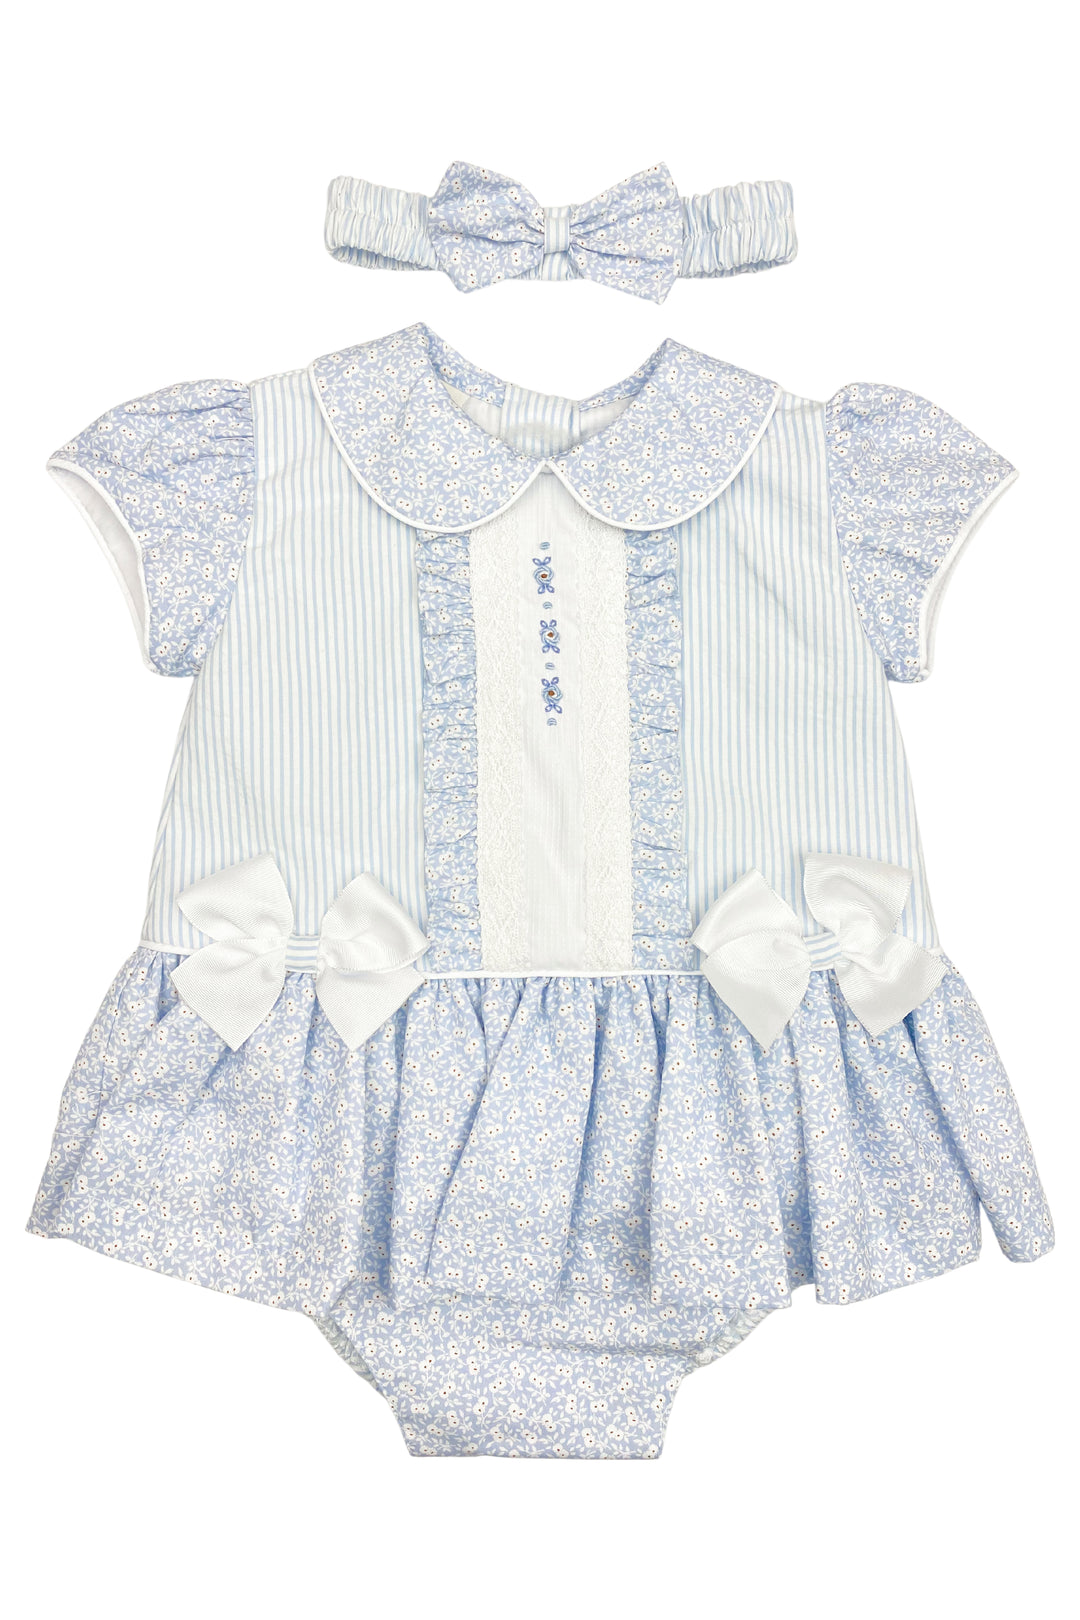 Pretty Originals "Seraphina" Blue Floral Dress, Bloomers & Headband | iphoneandroidapplications